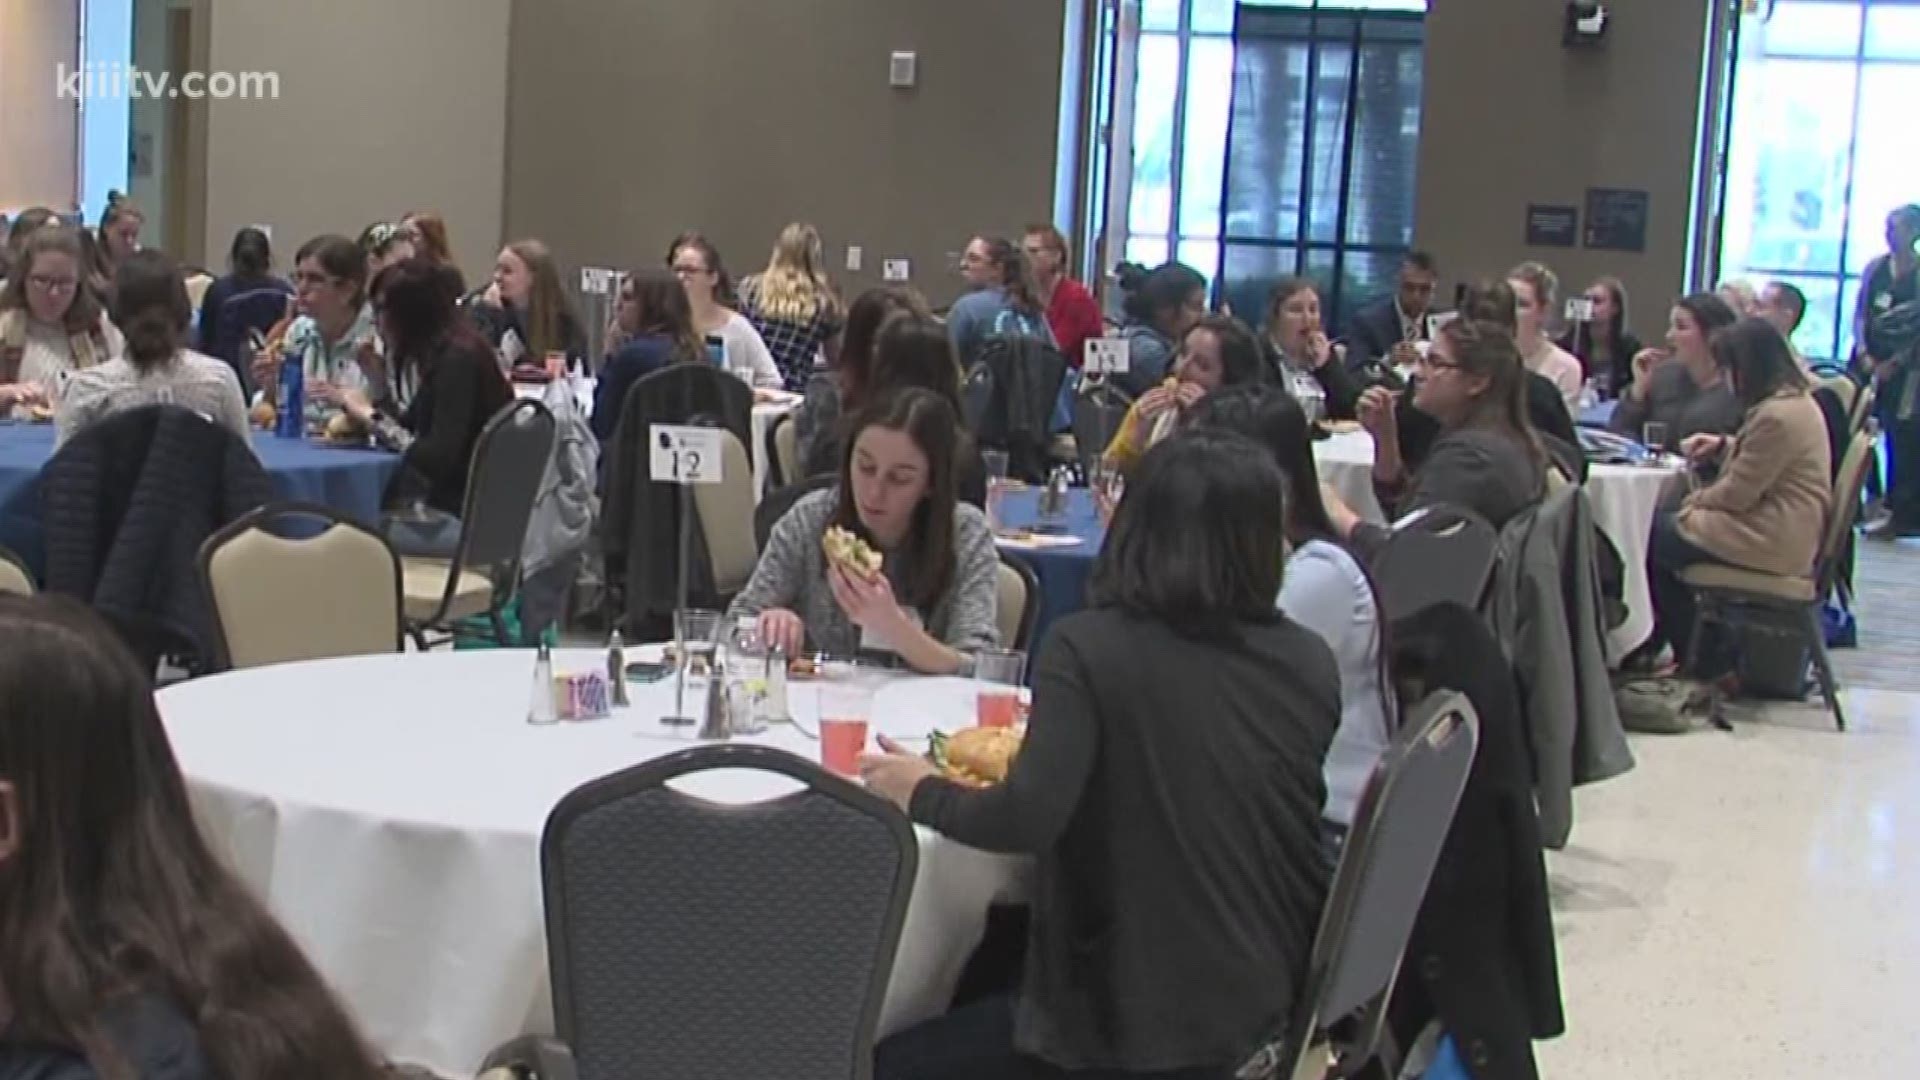 Hundreds of women attended a women in physics conference at TAMUCC Sunday.